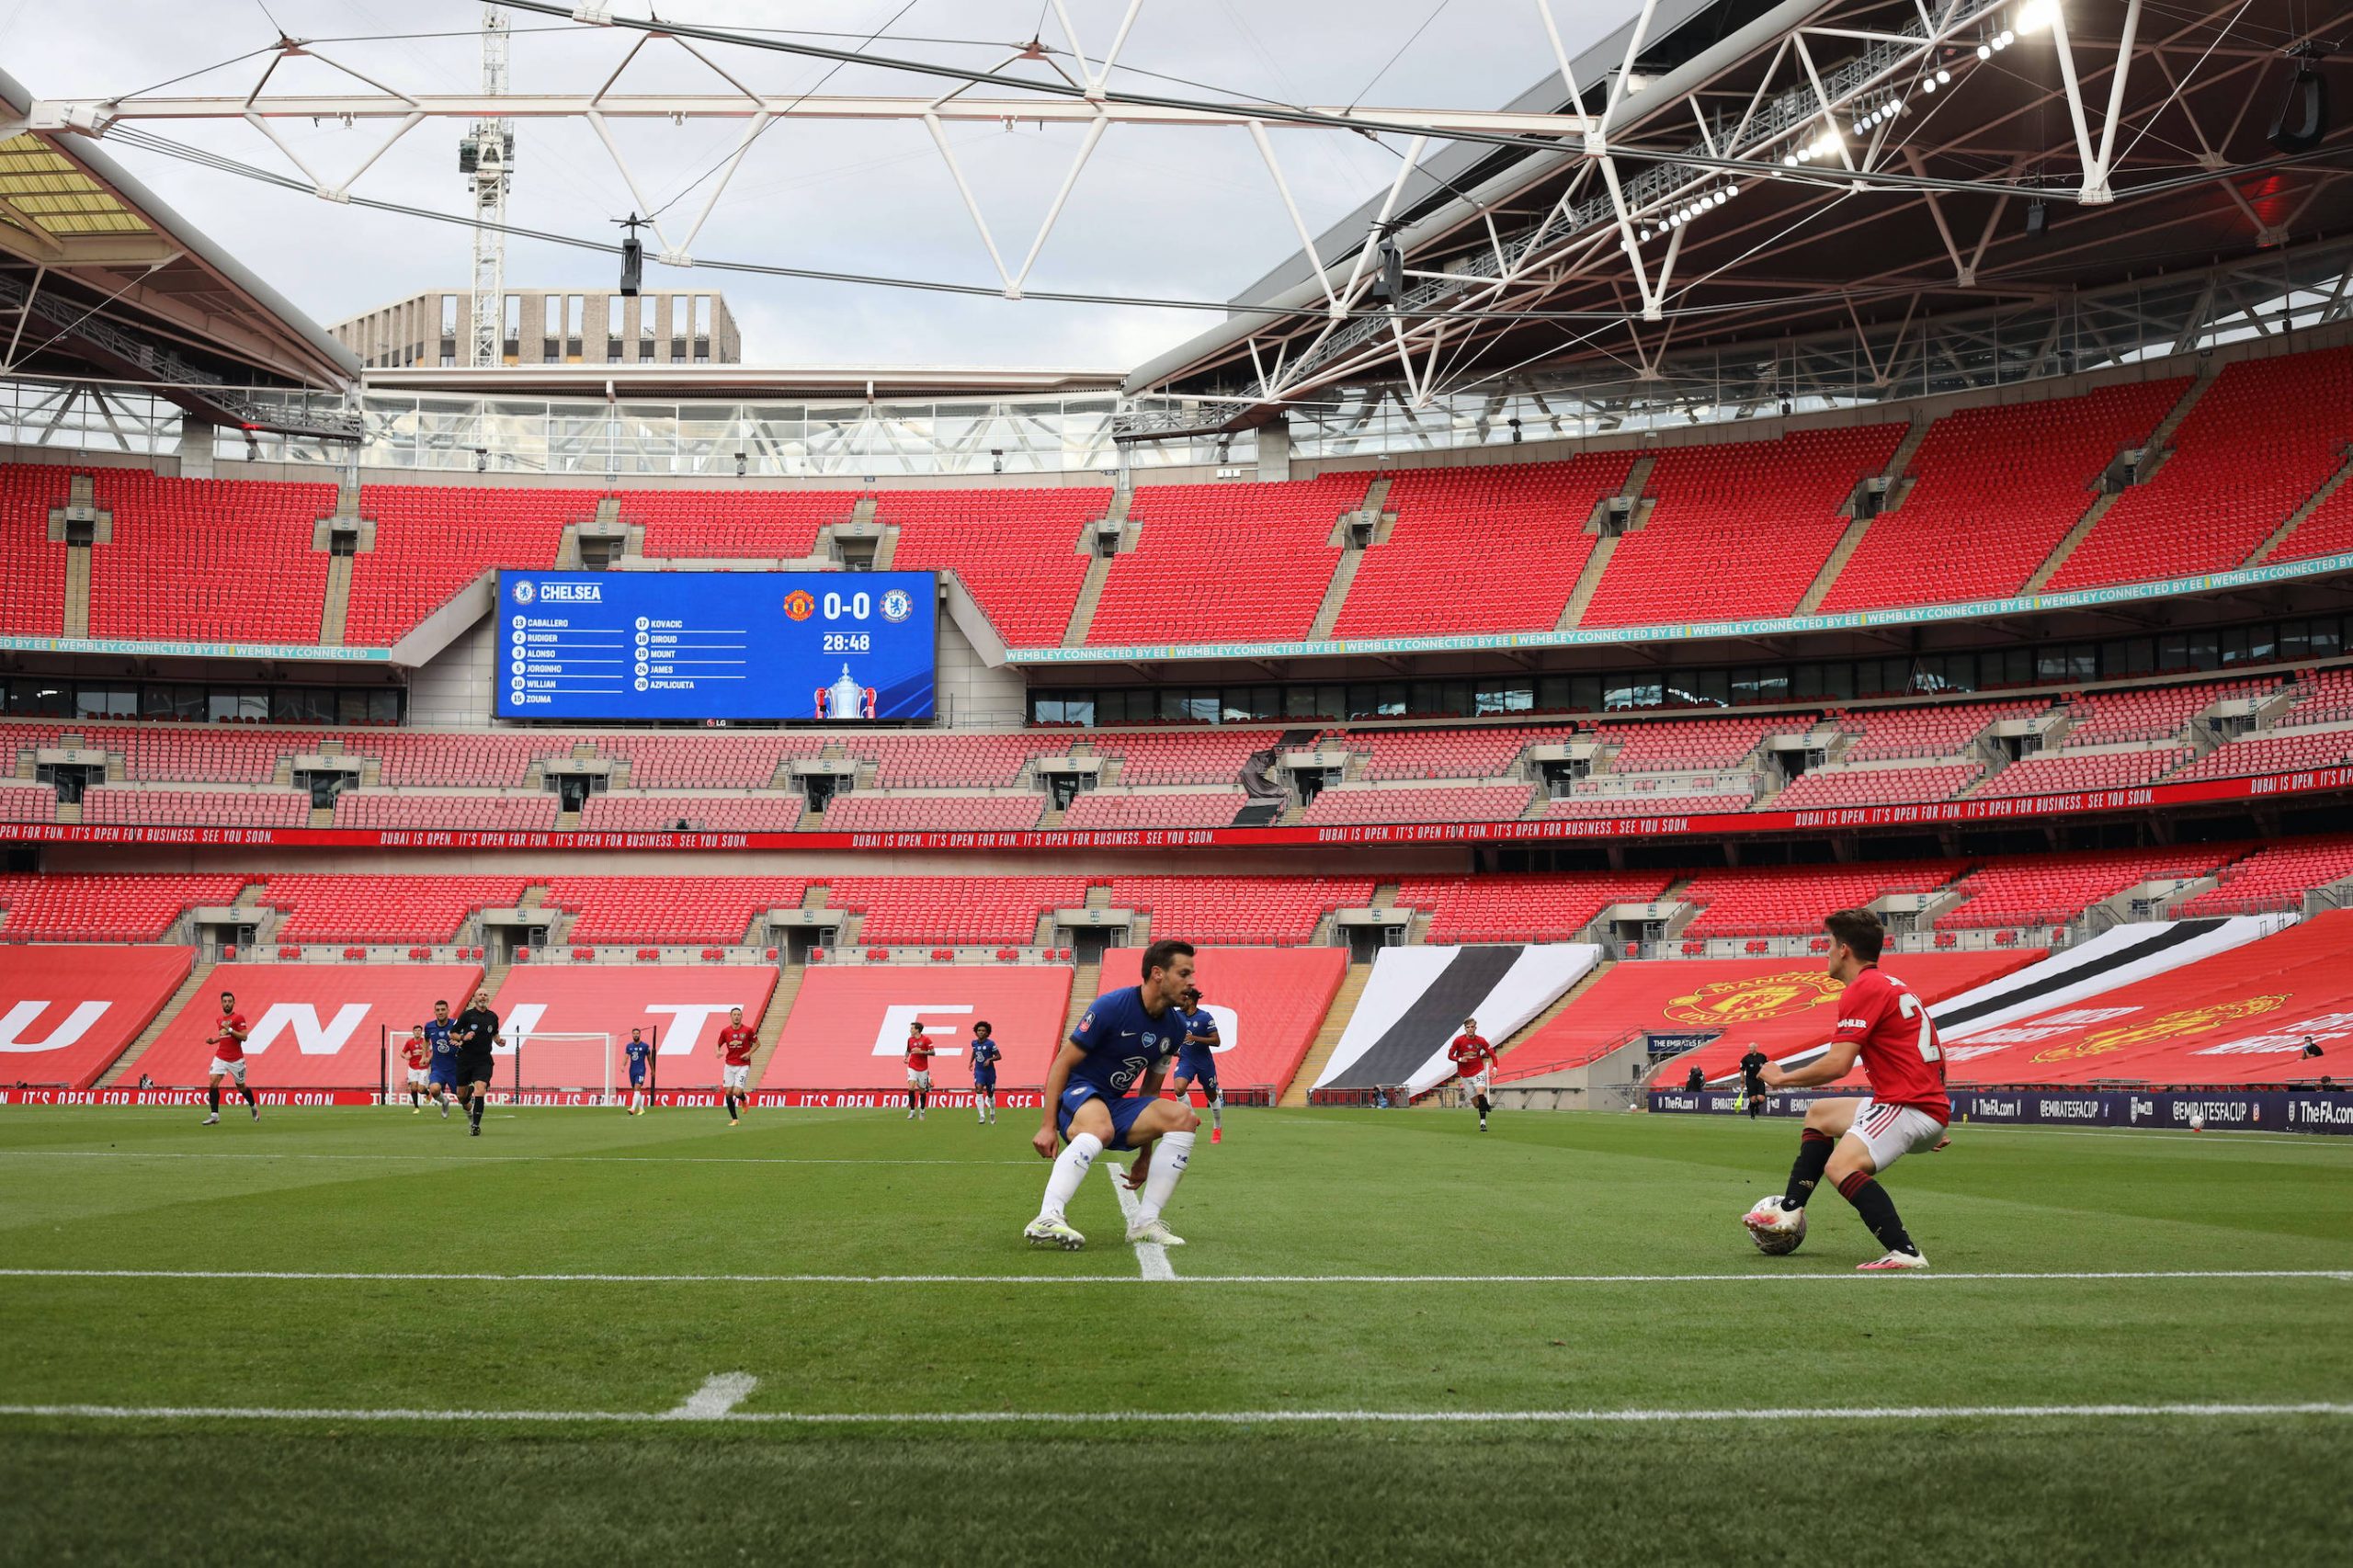 Football players play football on a stadium with empty stands